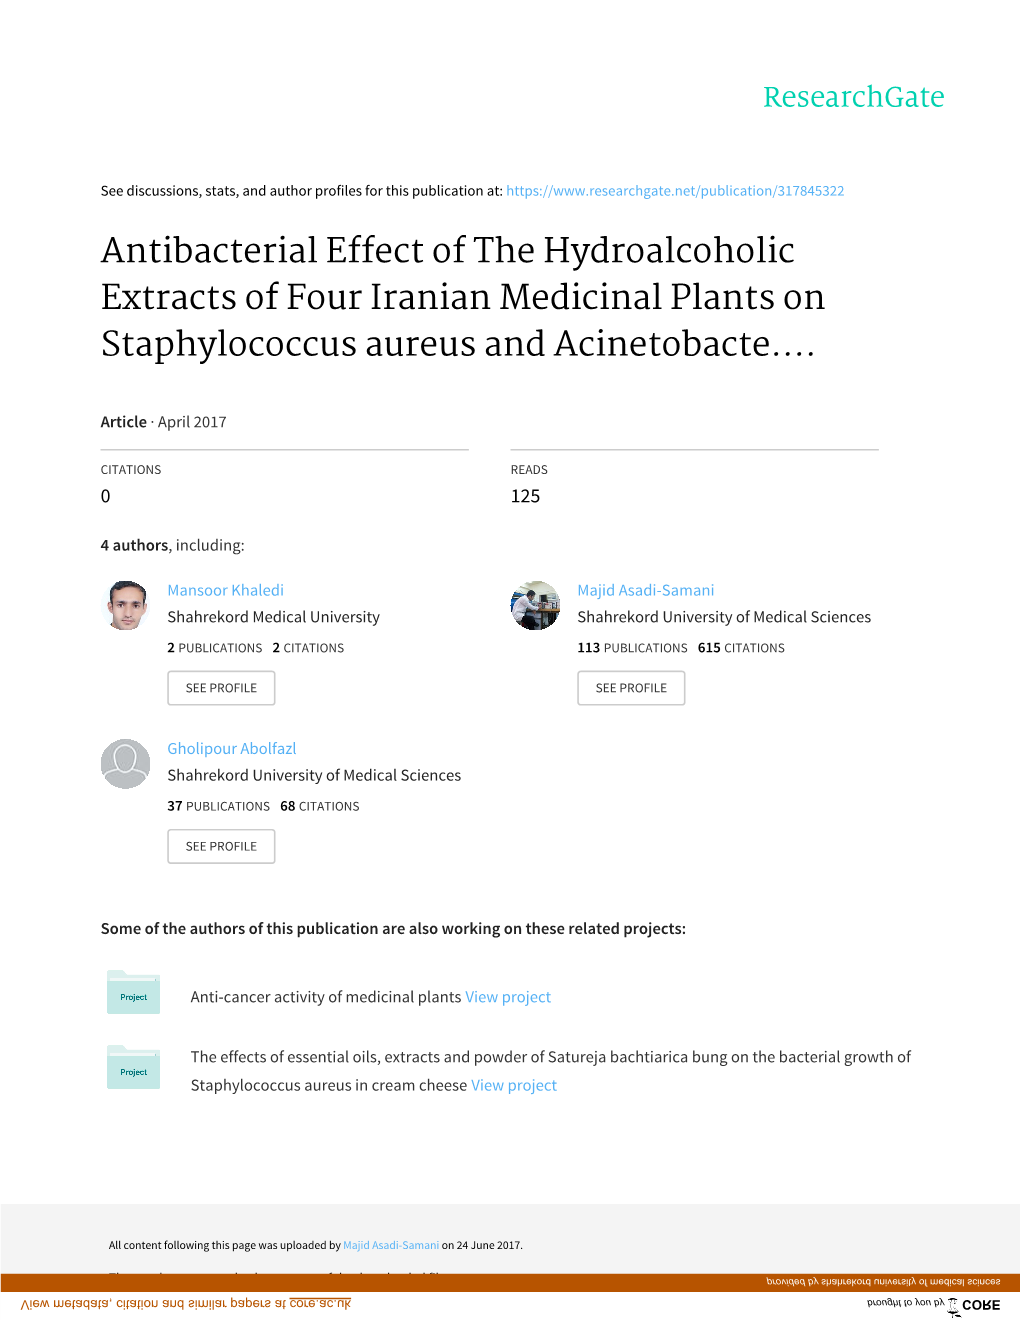 Antibacterial Effect of the Hydroalcoholic Extracts of Four Iranian Medicinal Plants on Staphylococcus Aureus and Acinetobacte